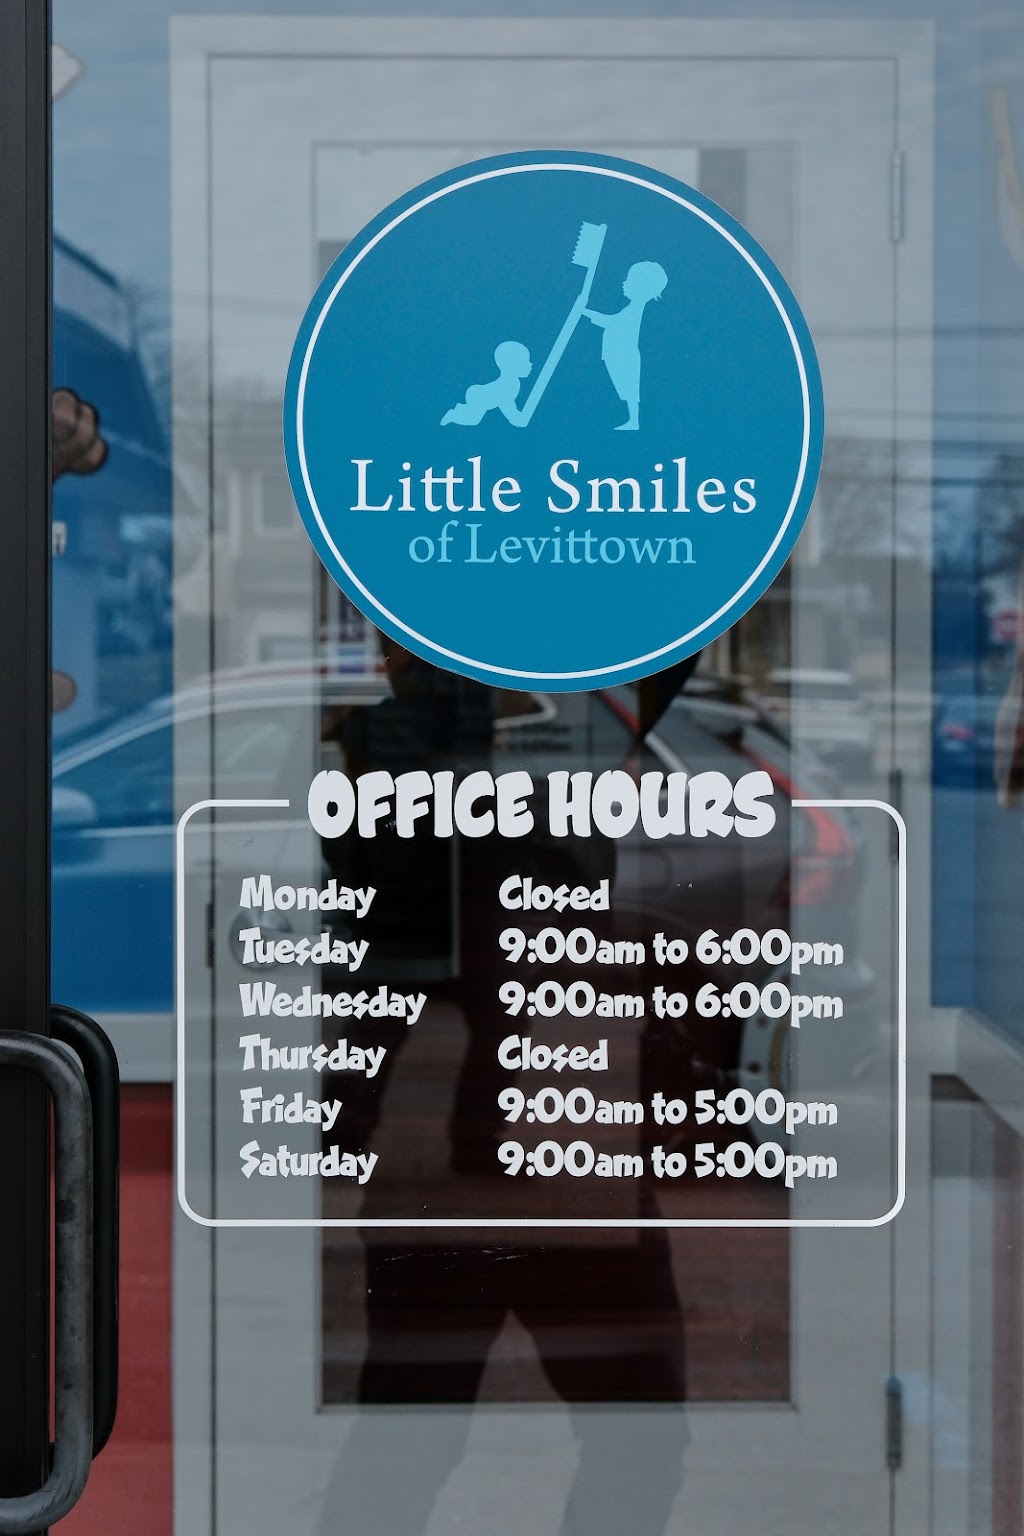 Little Smiles of Levittown | 636A Wantagh Ave, Levittown, NY 11756 | Phone: (516) 622-6630